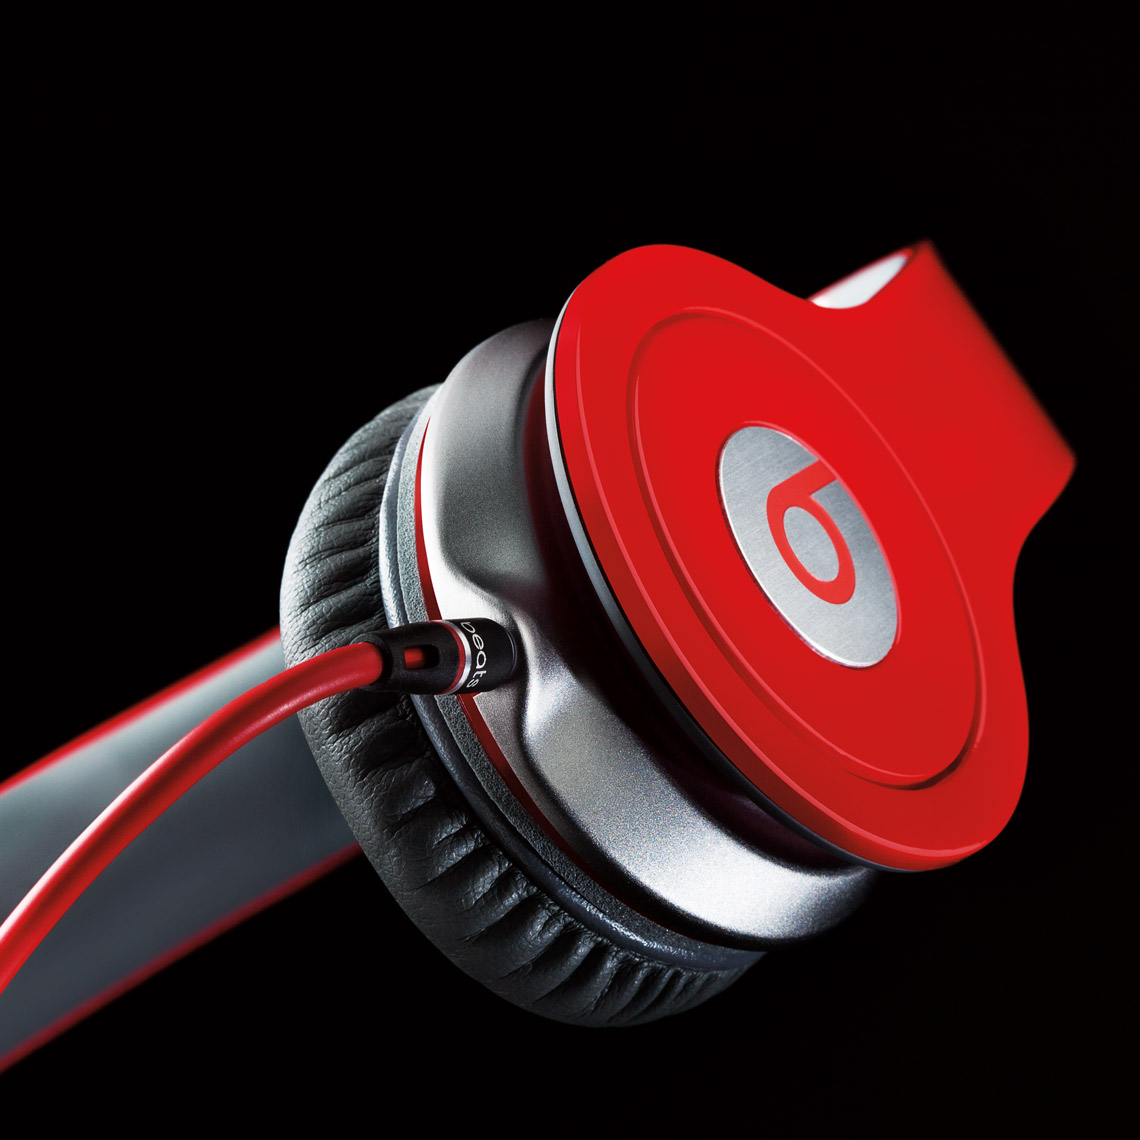 Product Photography Gadgets Beats By Dre Headphones Red Floating in Space Chicago